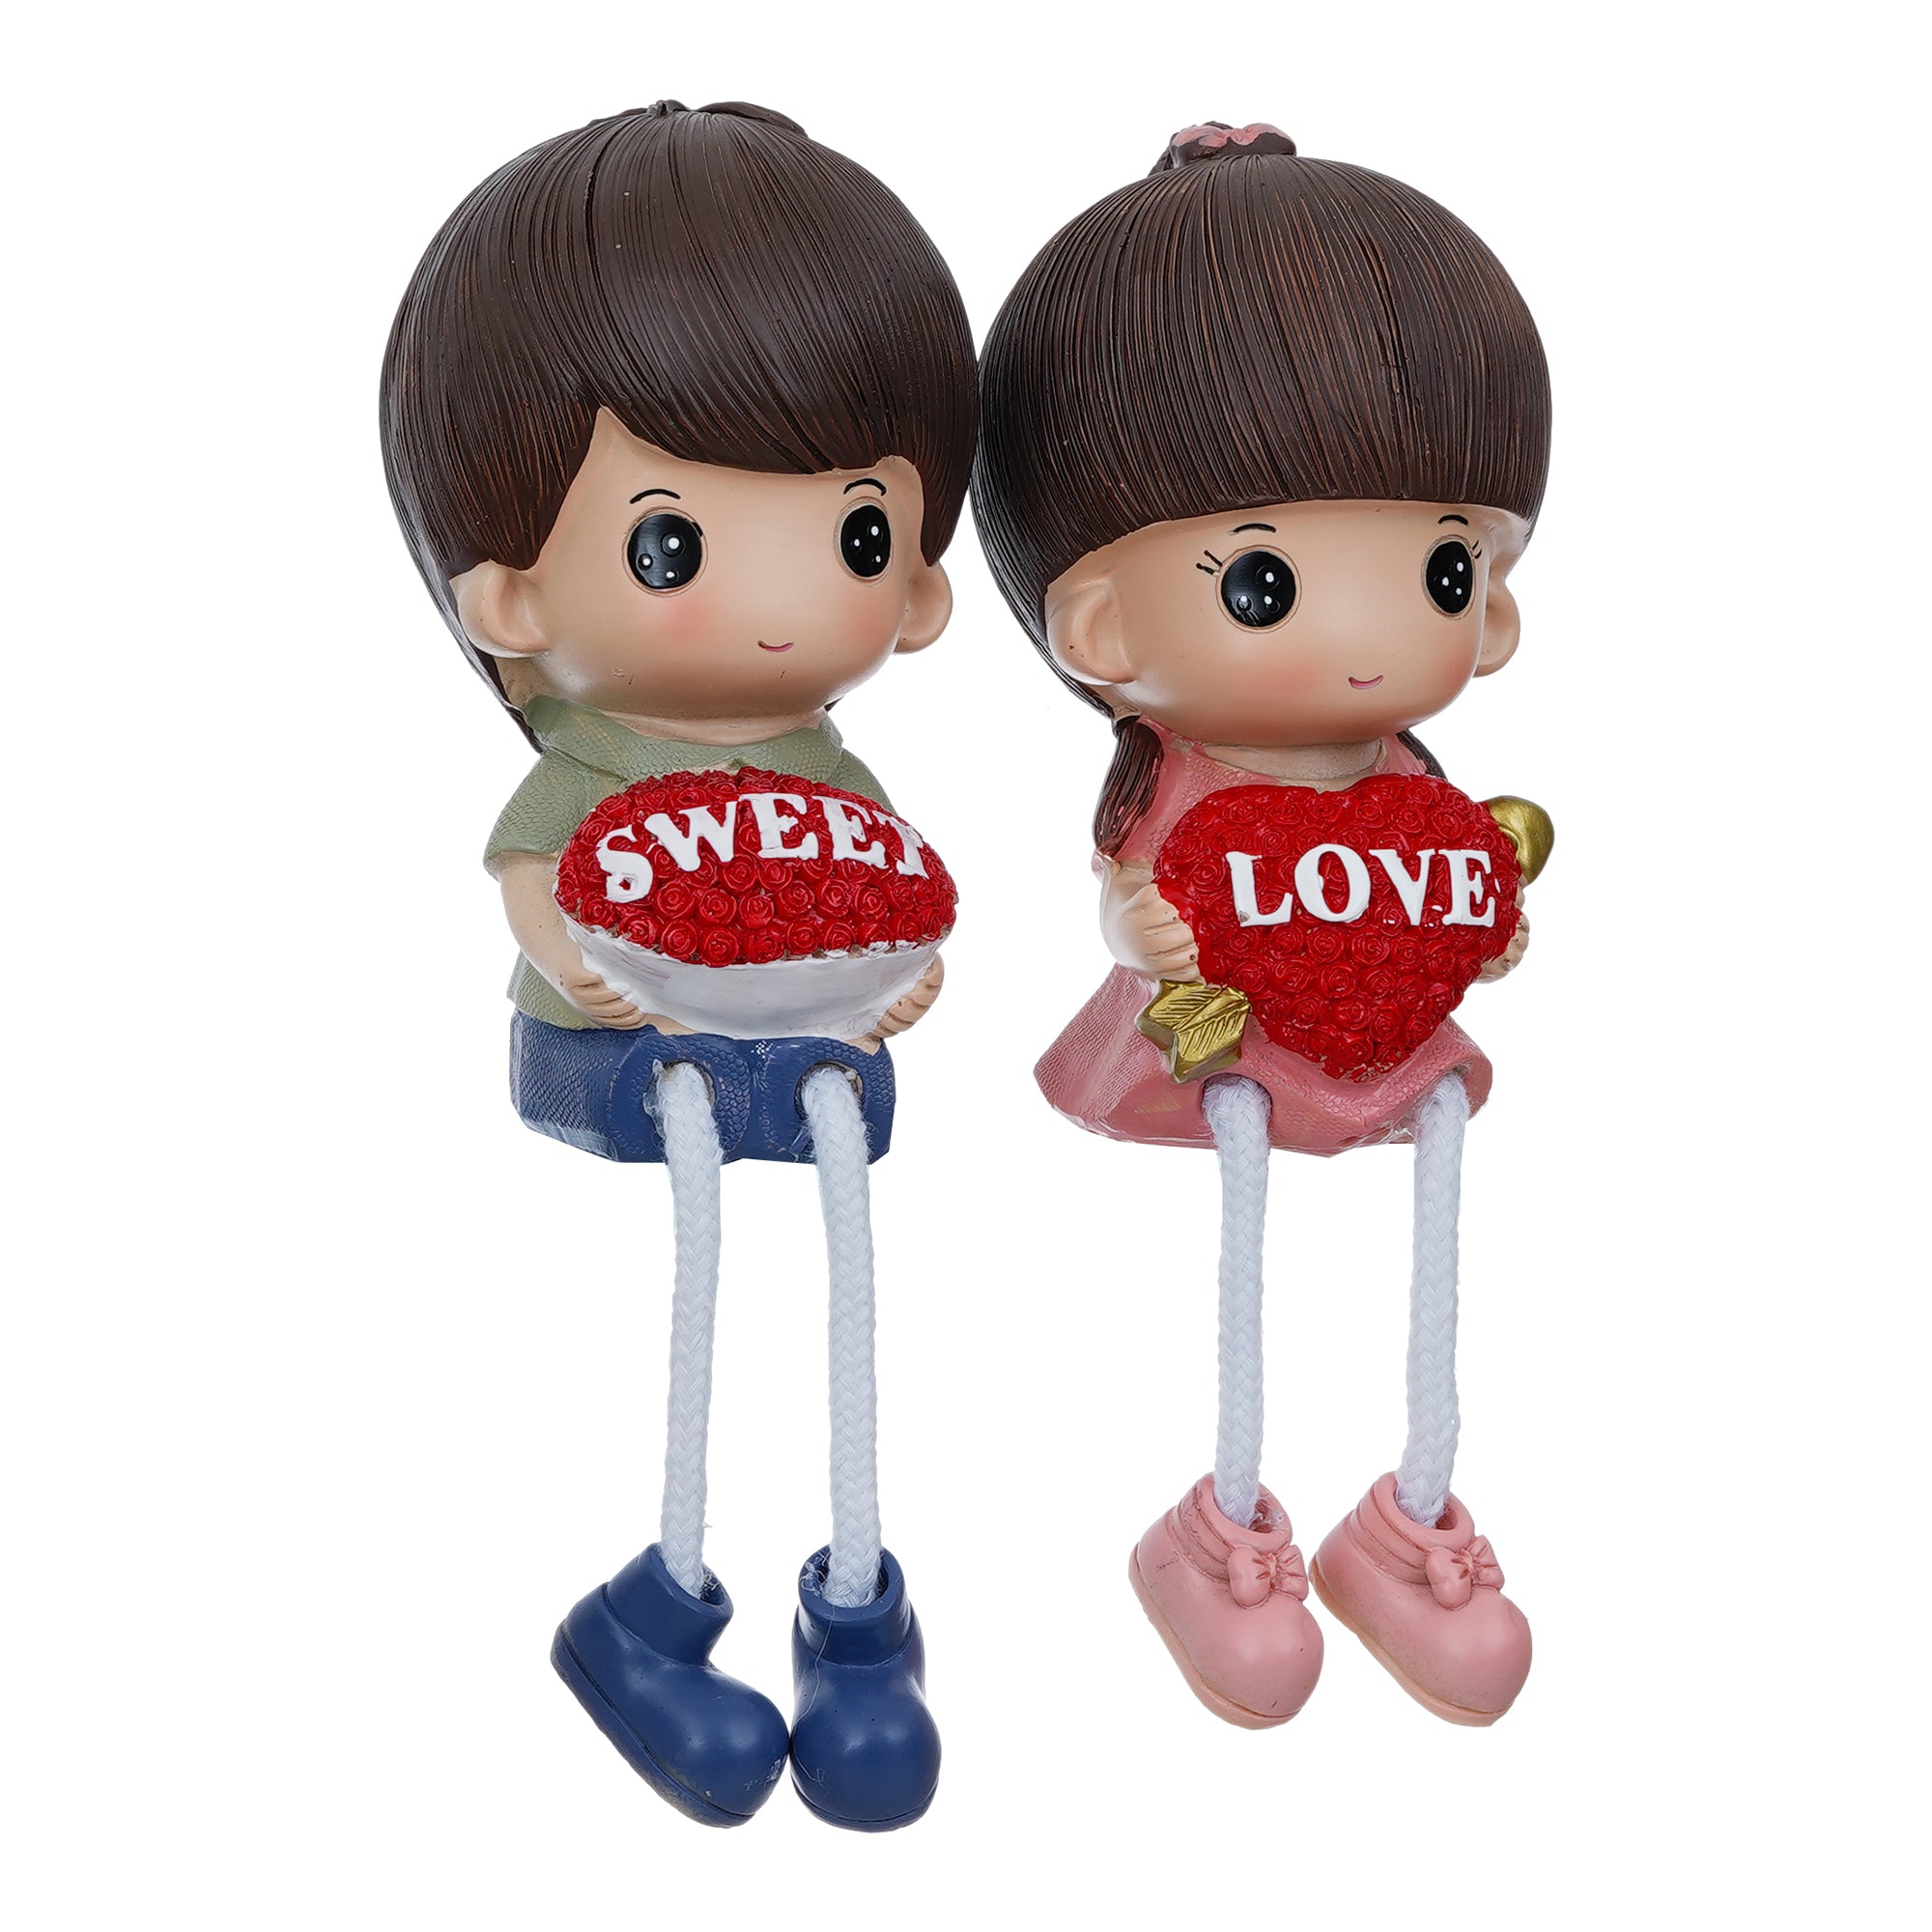 Valentine Combo of Colorful Sweet Love Girl & Boy Figurine, White Cycle with Teddy Bear and Rose Petals Gift Box 5